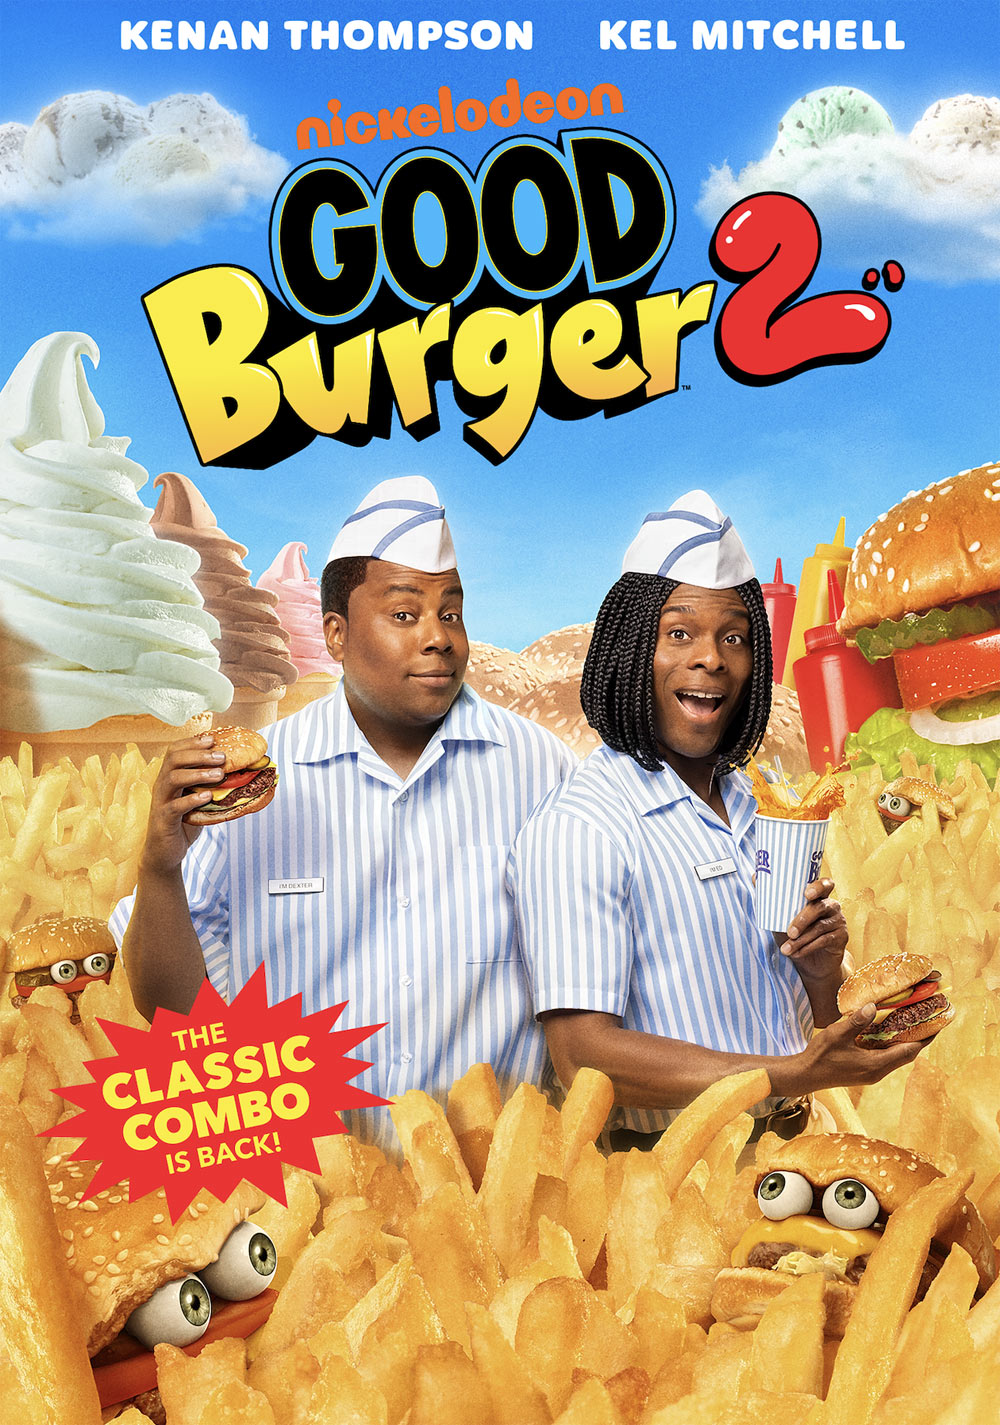 Good Burger 2 is coming to Bluray ™ and DVD on March 26, On Digital